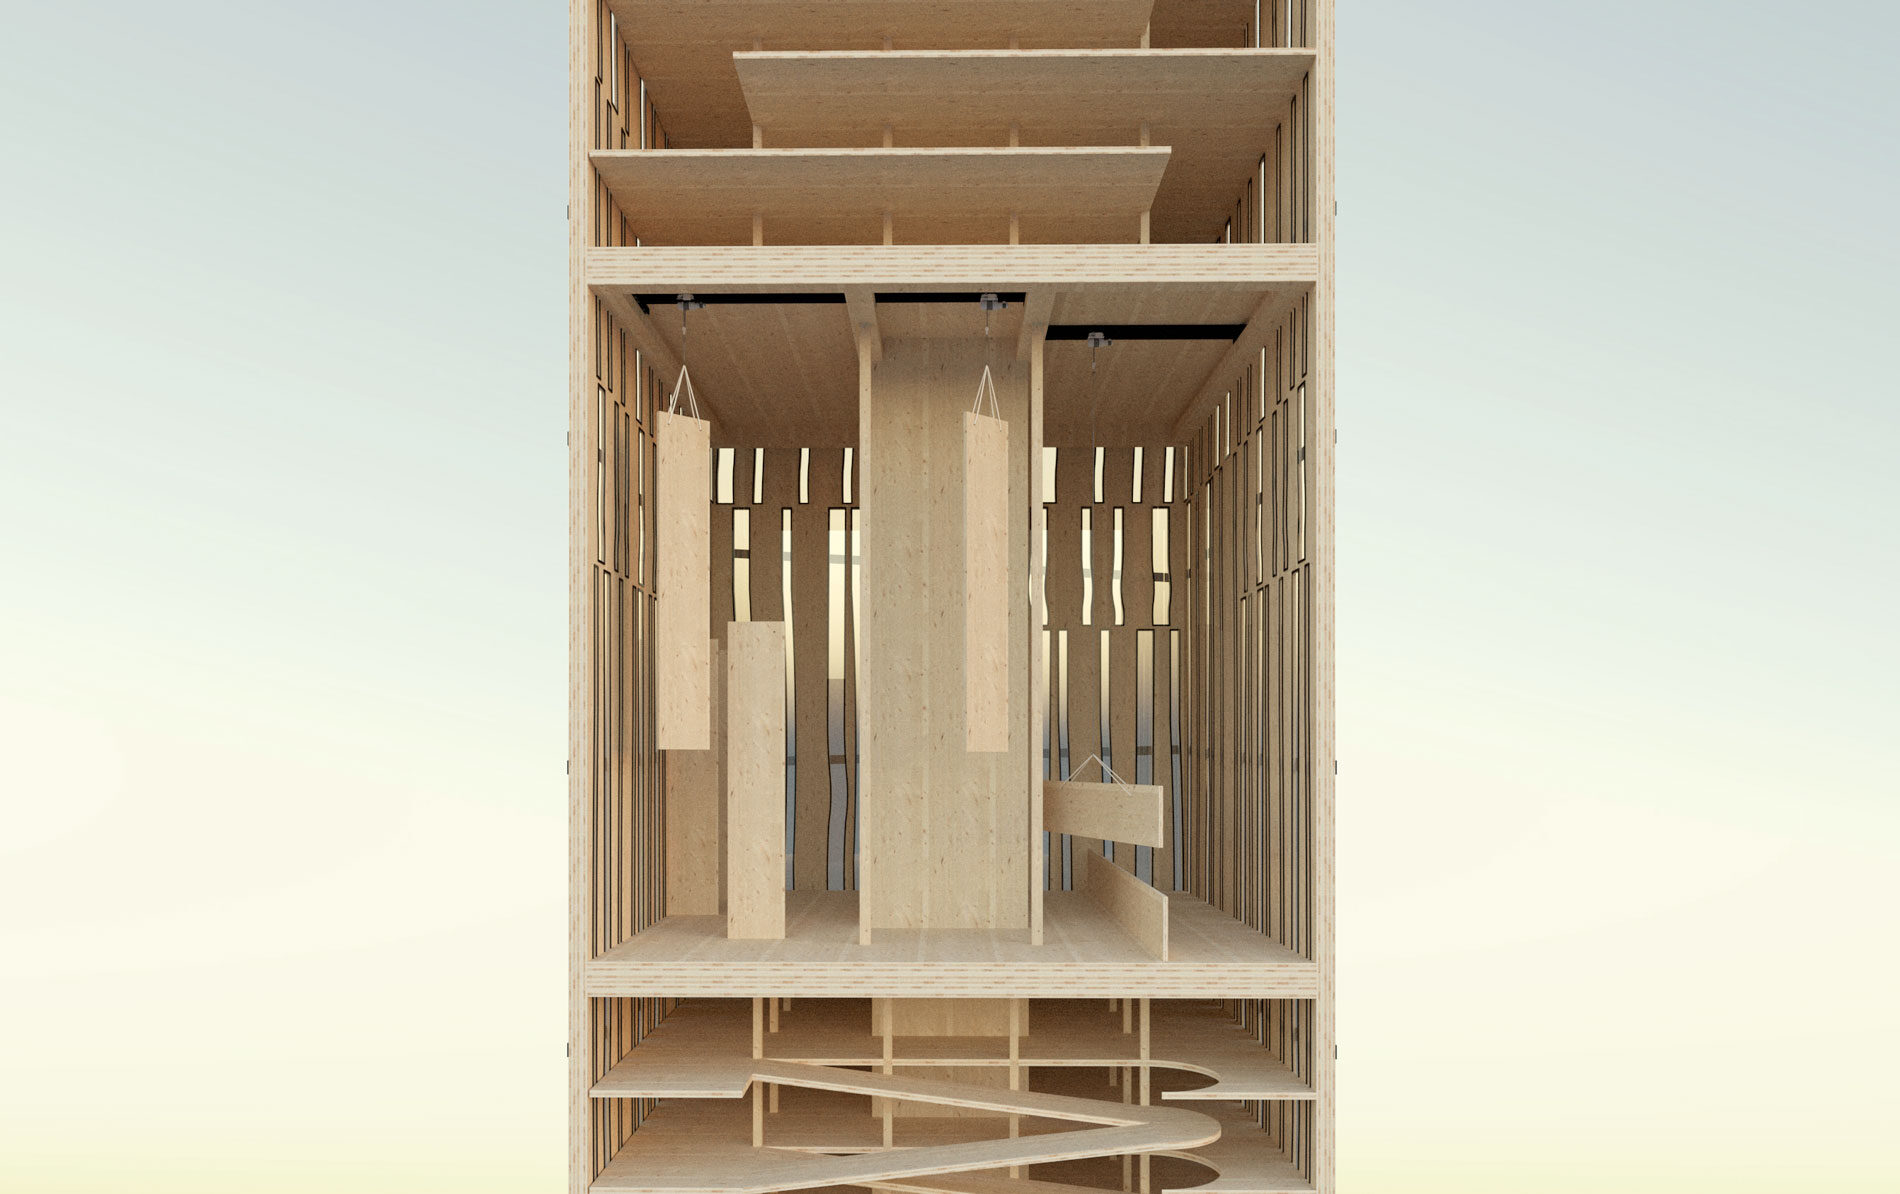 CLT tower section